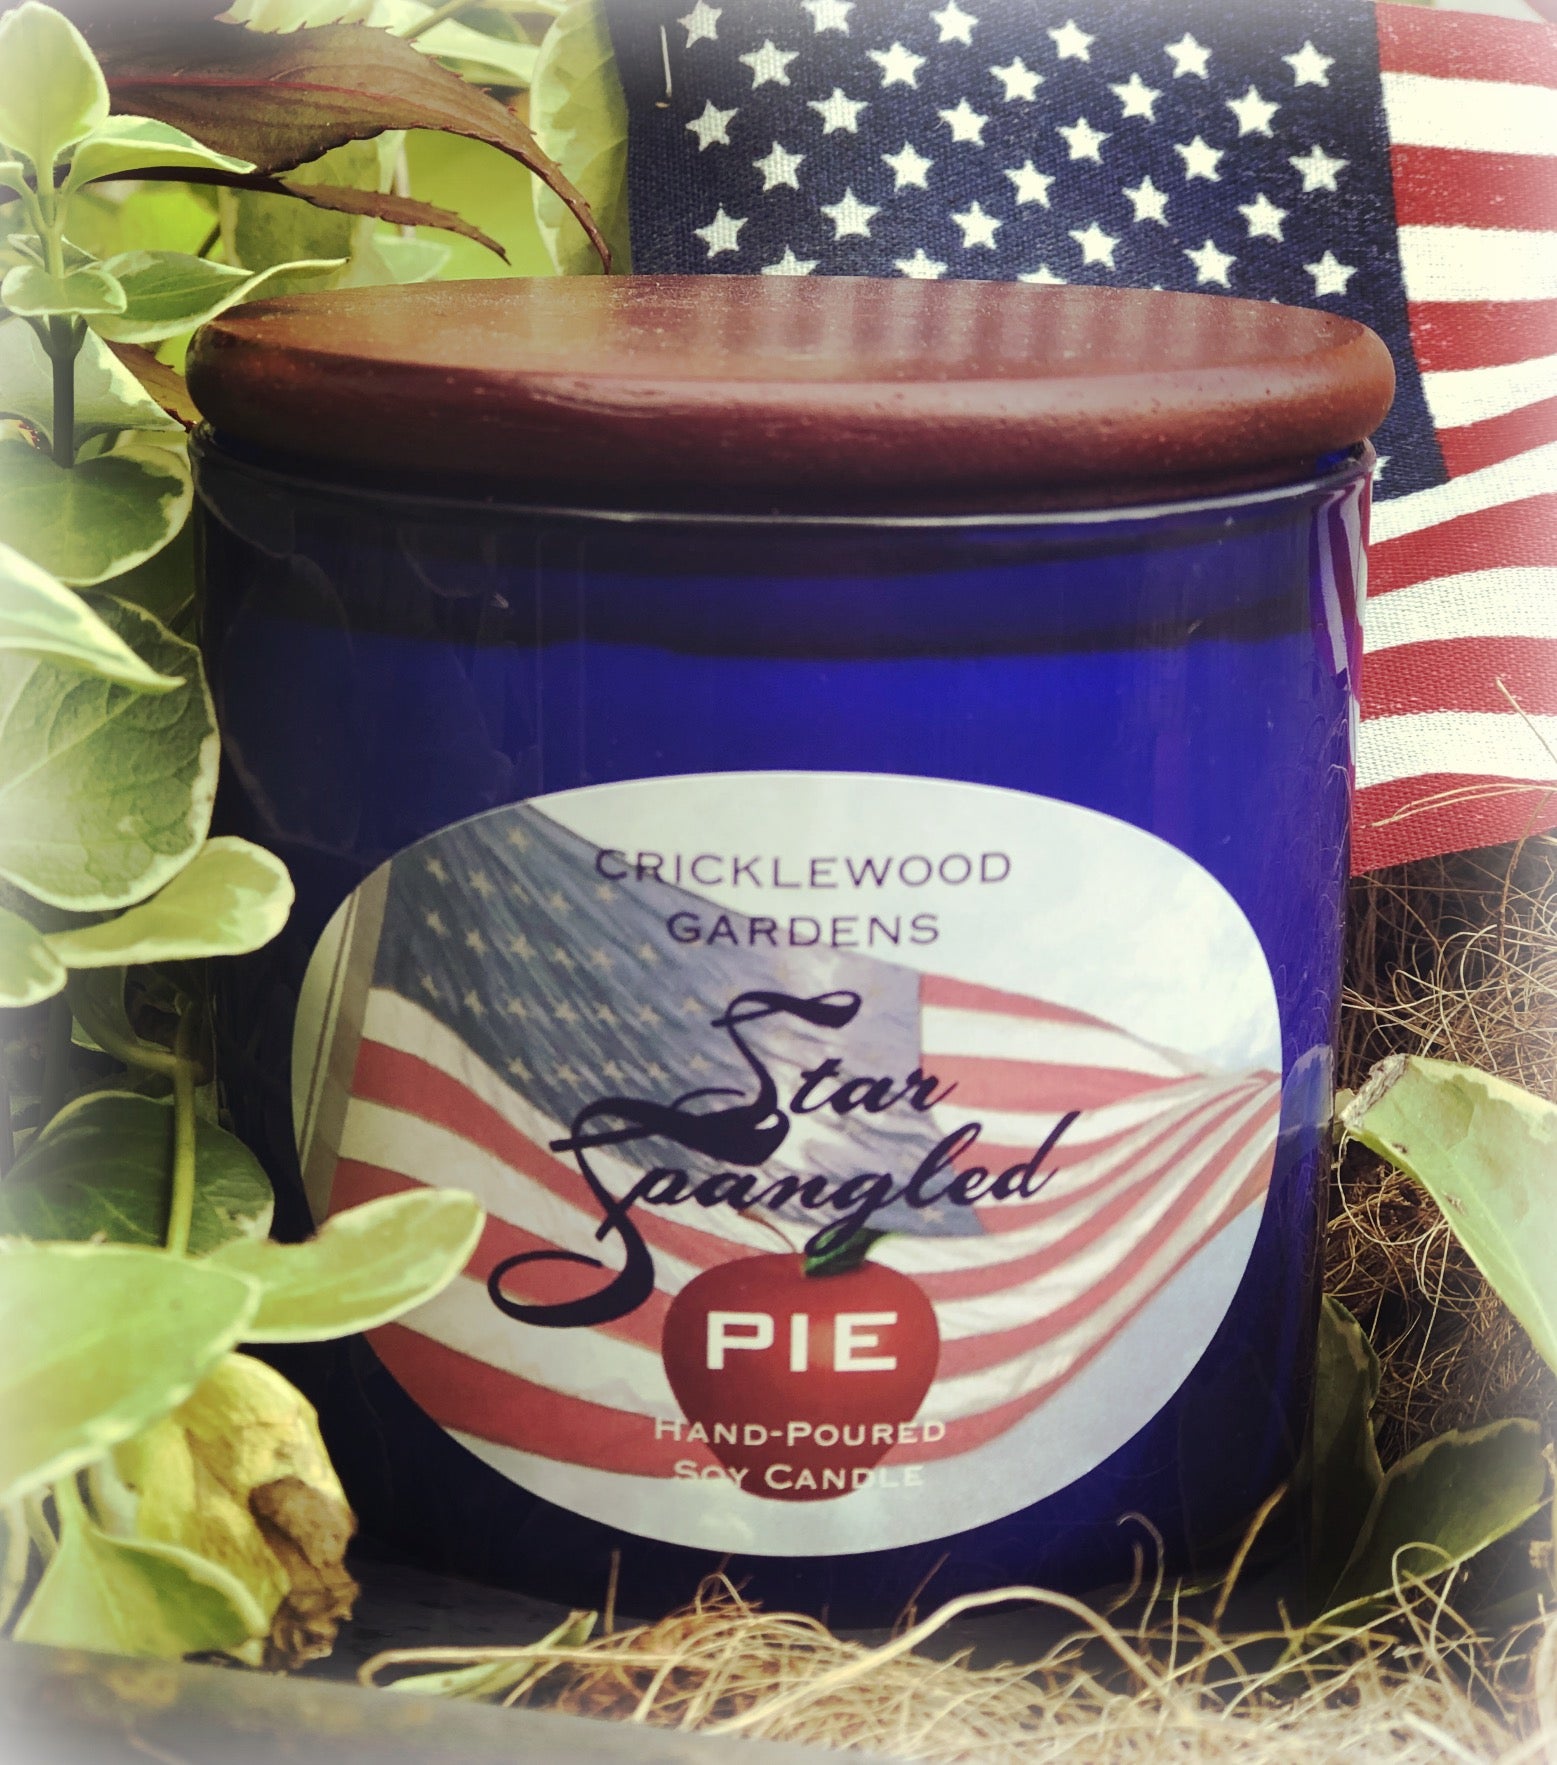 Star Spangled Pie Natural Soy Candles 11oz (White Label)